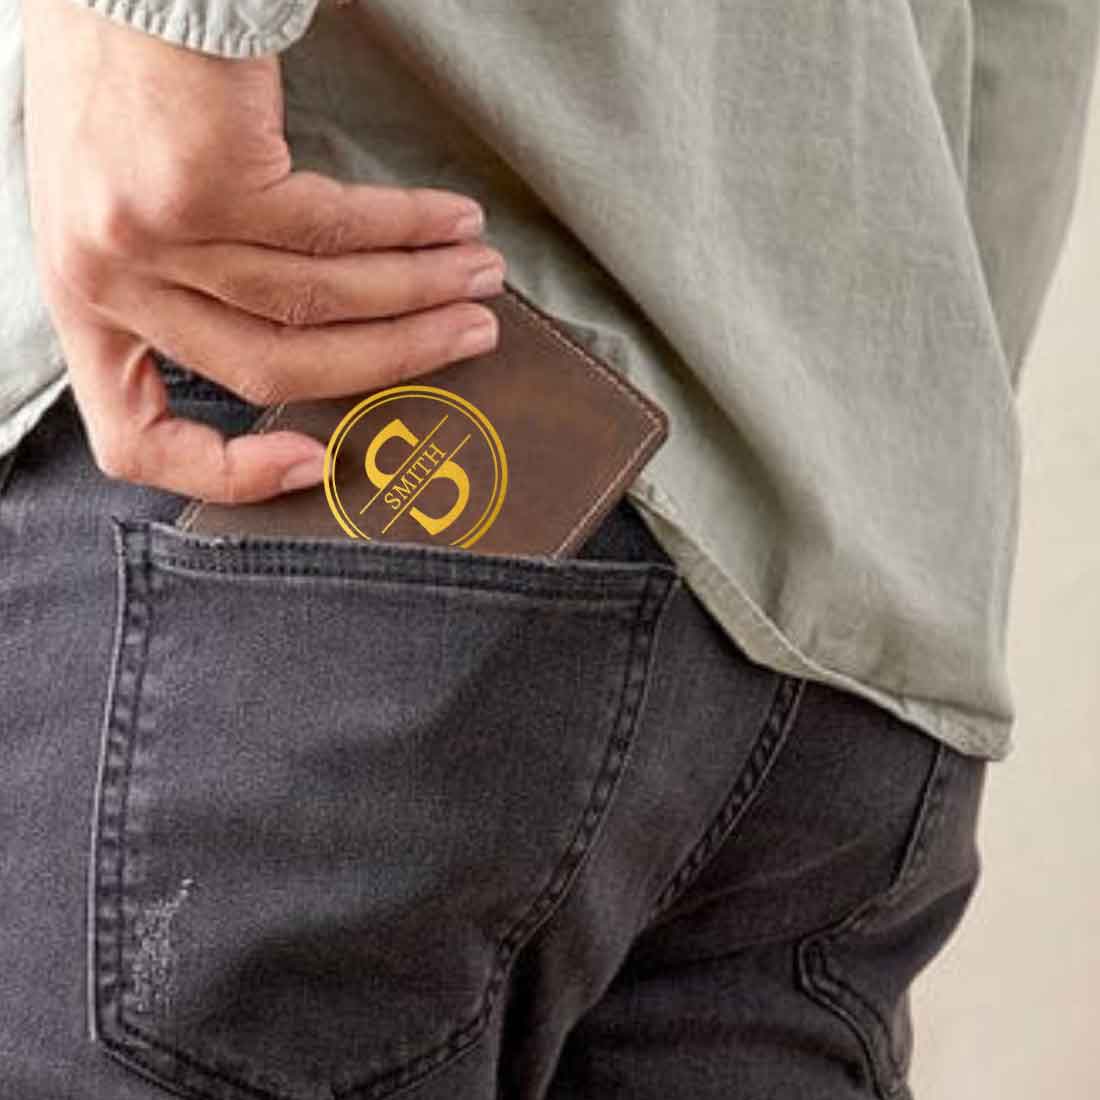 Personalized Wallet Men With Name Gents Purse - Brown Nutcase